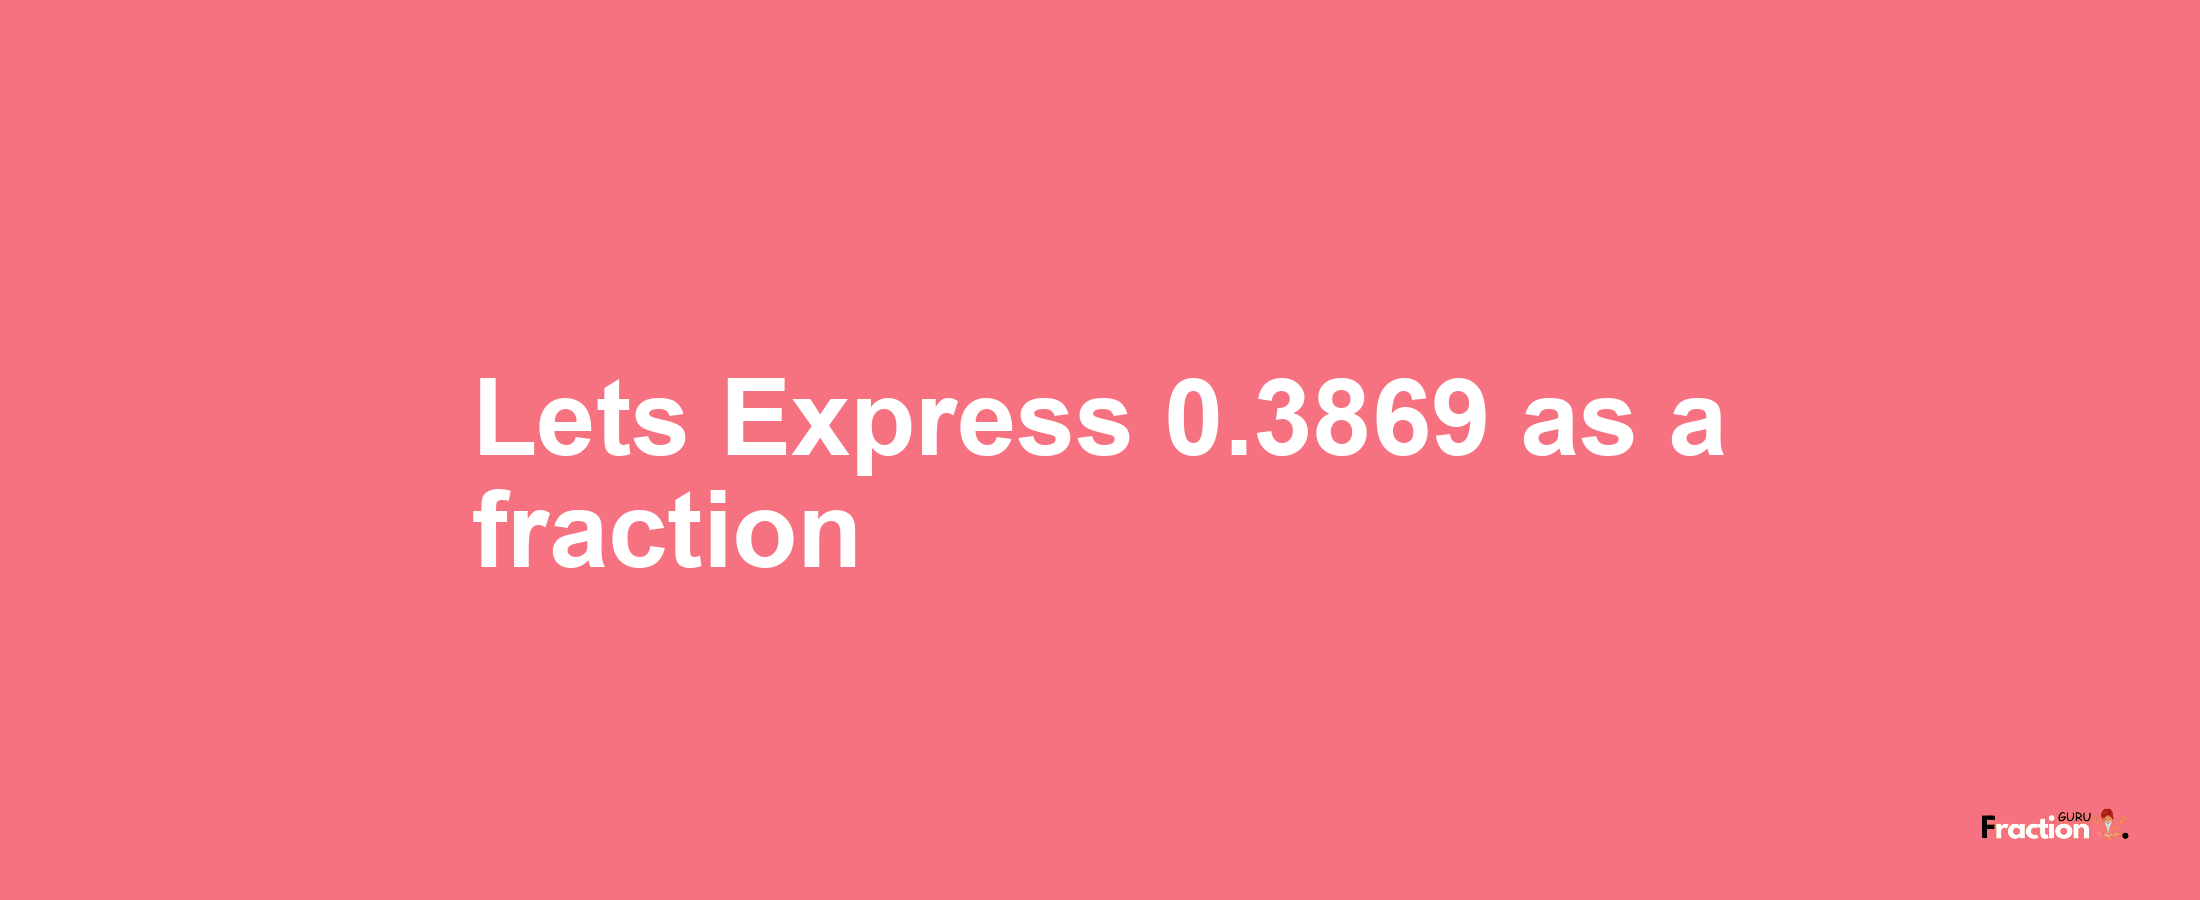 Lets Express 0.3869 as afraction